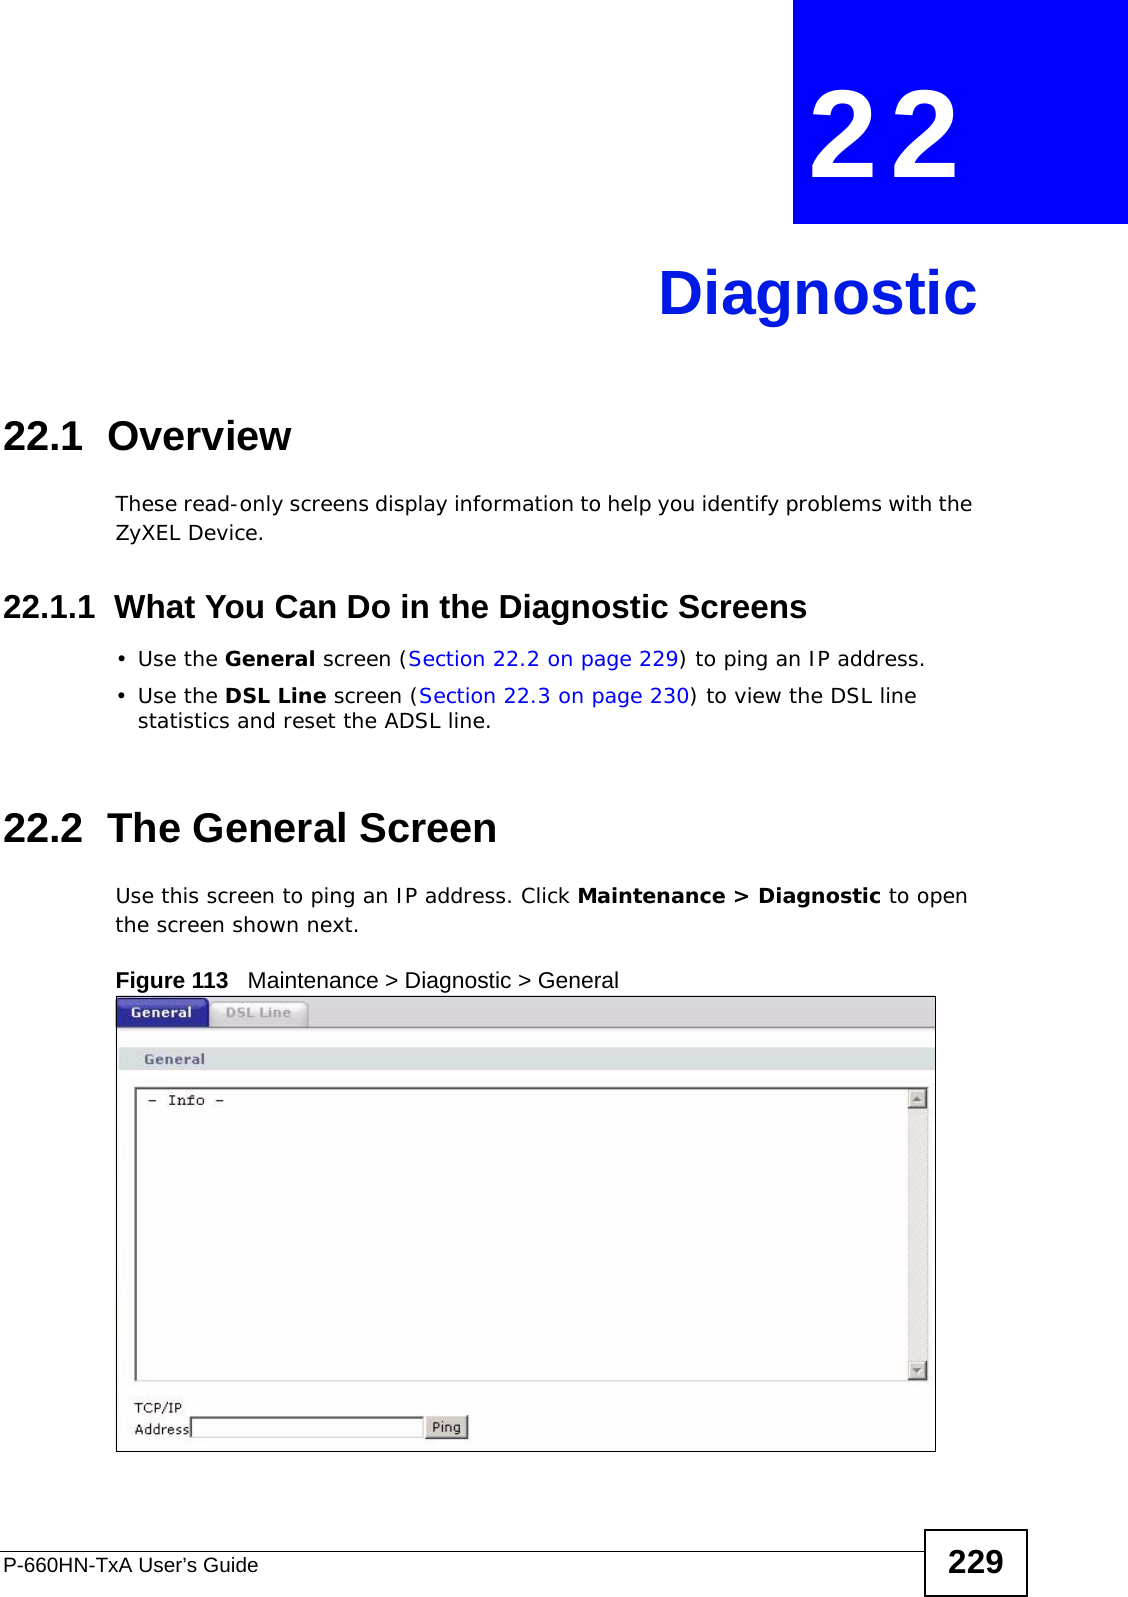 P-660HN-TxA User’s Guide 229CHAPTER  22 Diagnostic22.1  OverviewThese read-only screens display information to help you identify problems with the ZyXEL Device.22.1.1  What You Can Do in the Diagnostic Screens•Use the General screen (Section 22.2 on page 229) to ping an IP address.•Use the DSL Line screen (Section 22.3 on page 230) to view the DSL line statistics and reset the ADSL line.22.2  The General Screen Use this screen to ping an IP address. Click Maintenance &gt; Diagnostic to open the screen shown next.Figure 113   Maintenance &gt; Diagnostic &gt; General